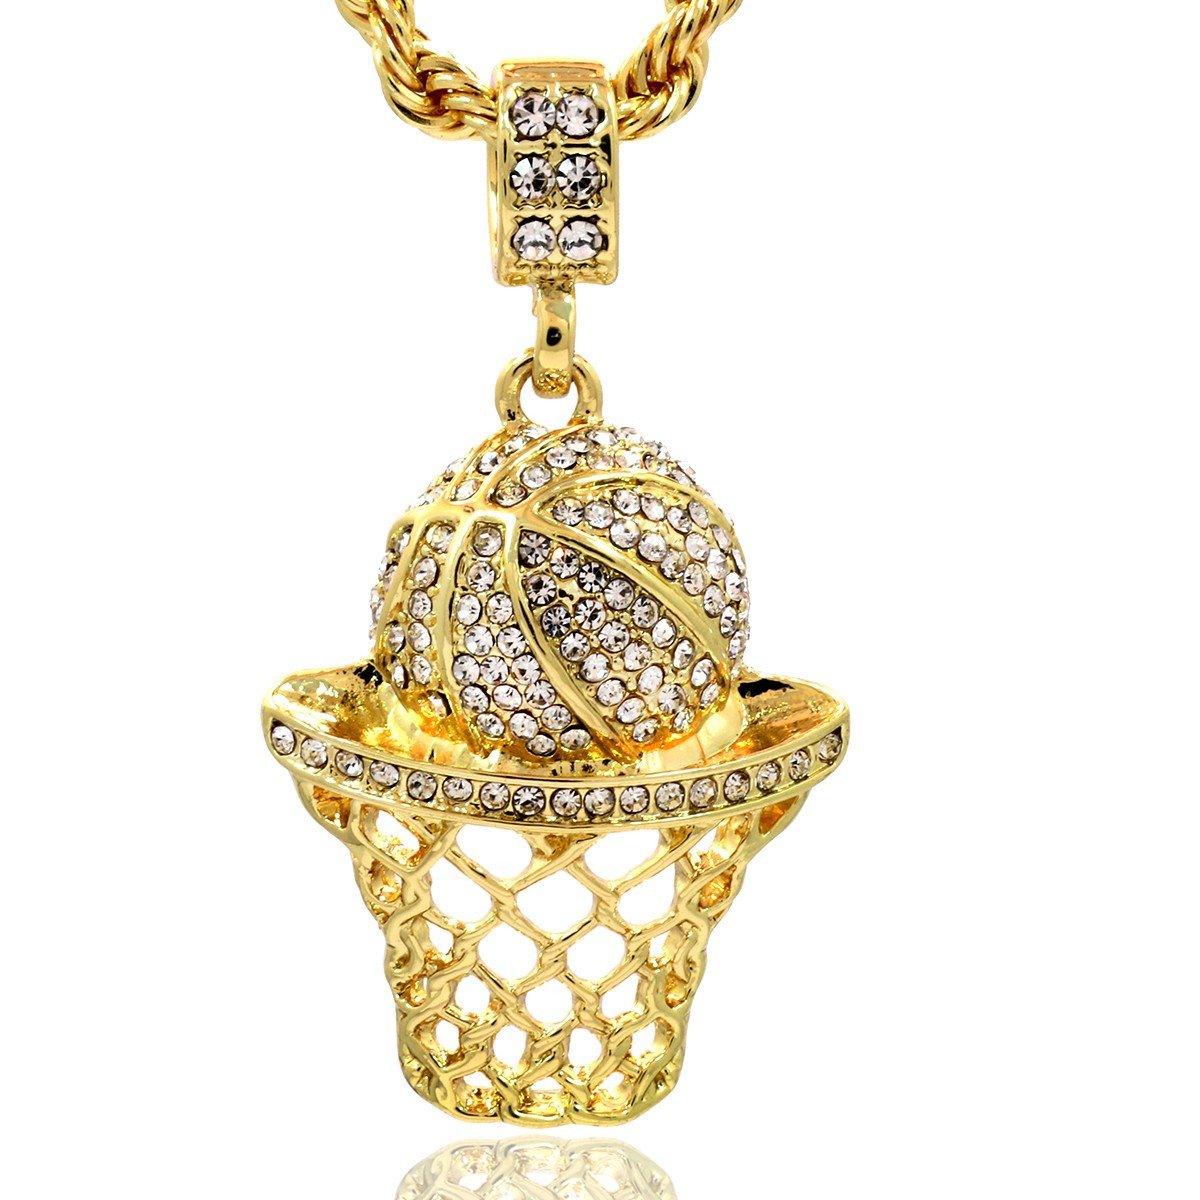 BASKET CZ PENDANT WITH GOLD ROPE CHAIN